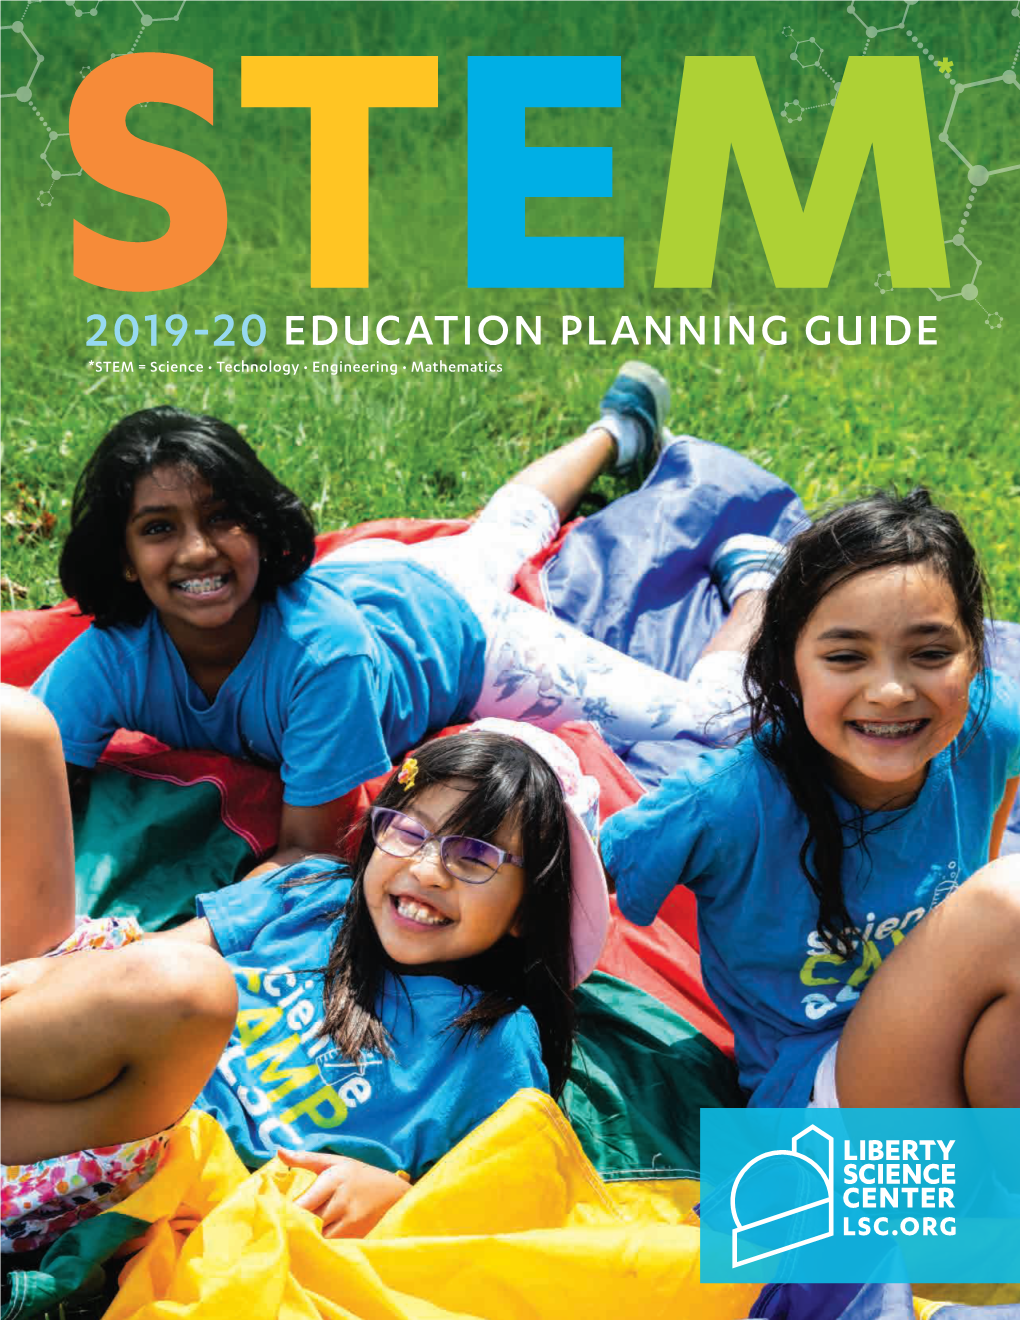 Education Planning Guide